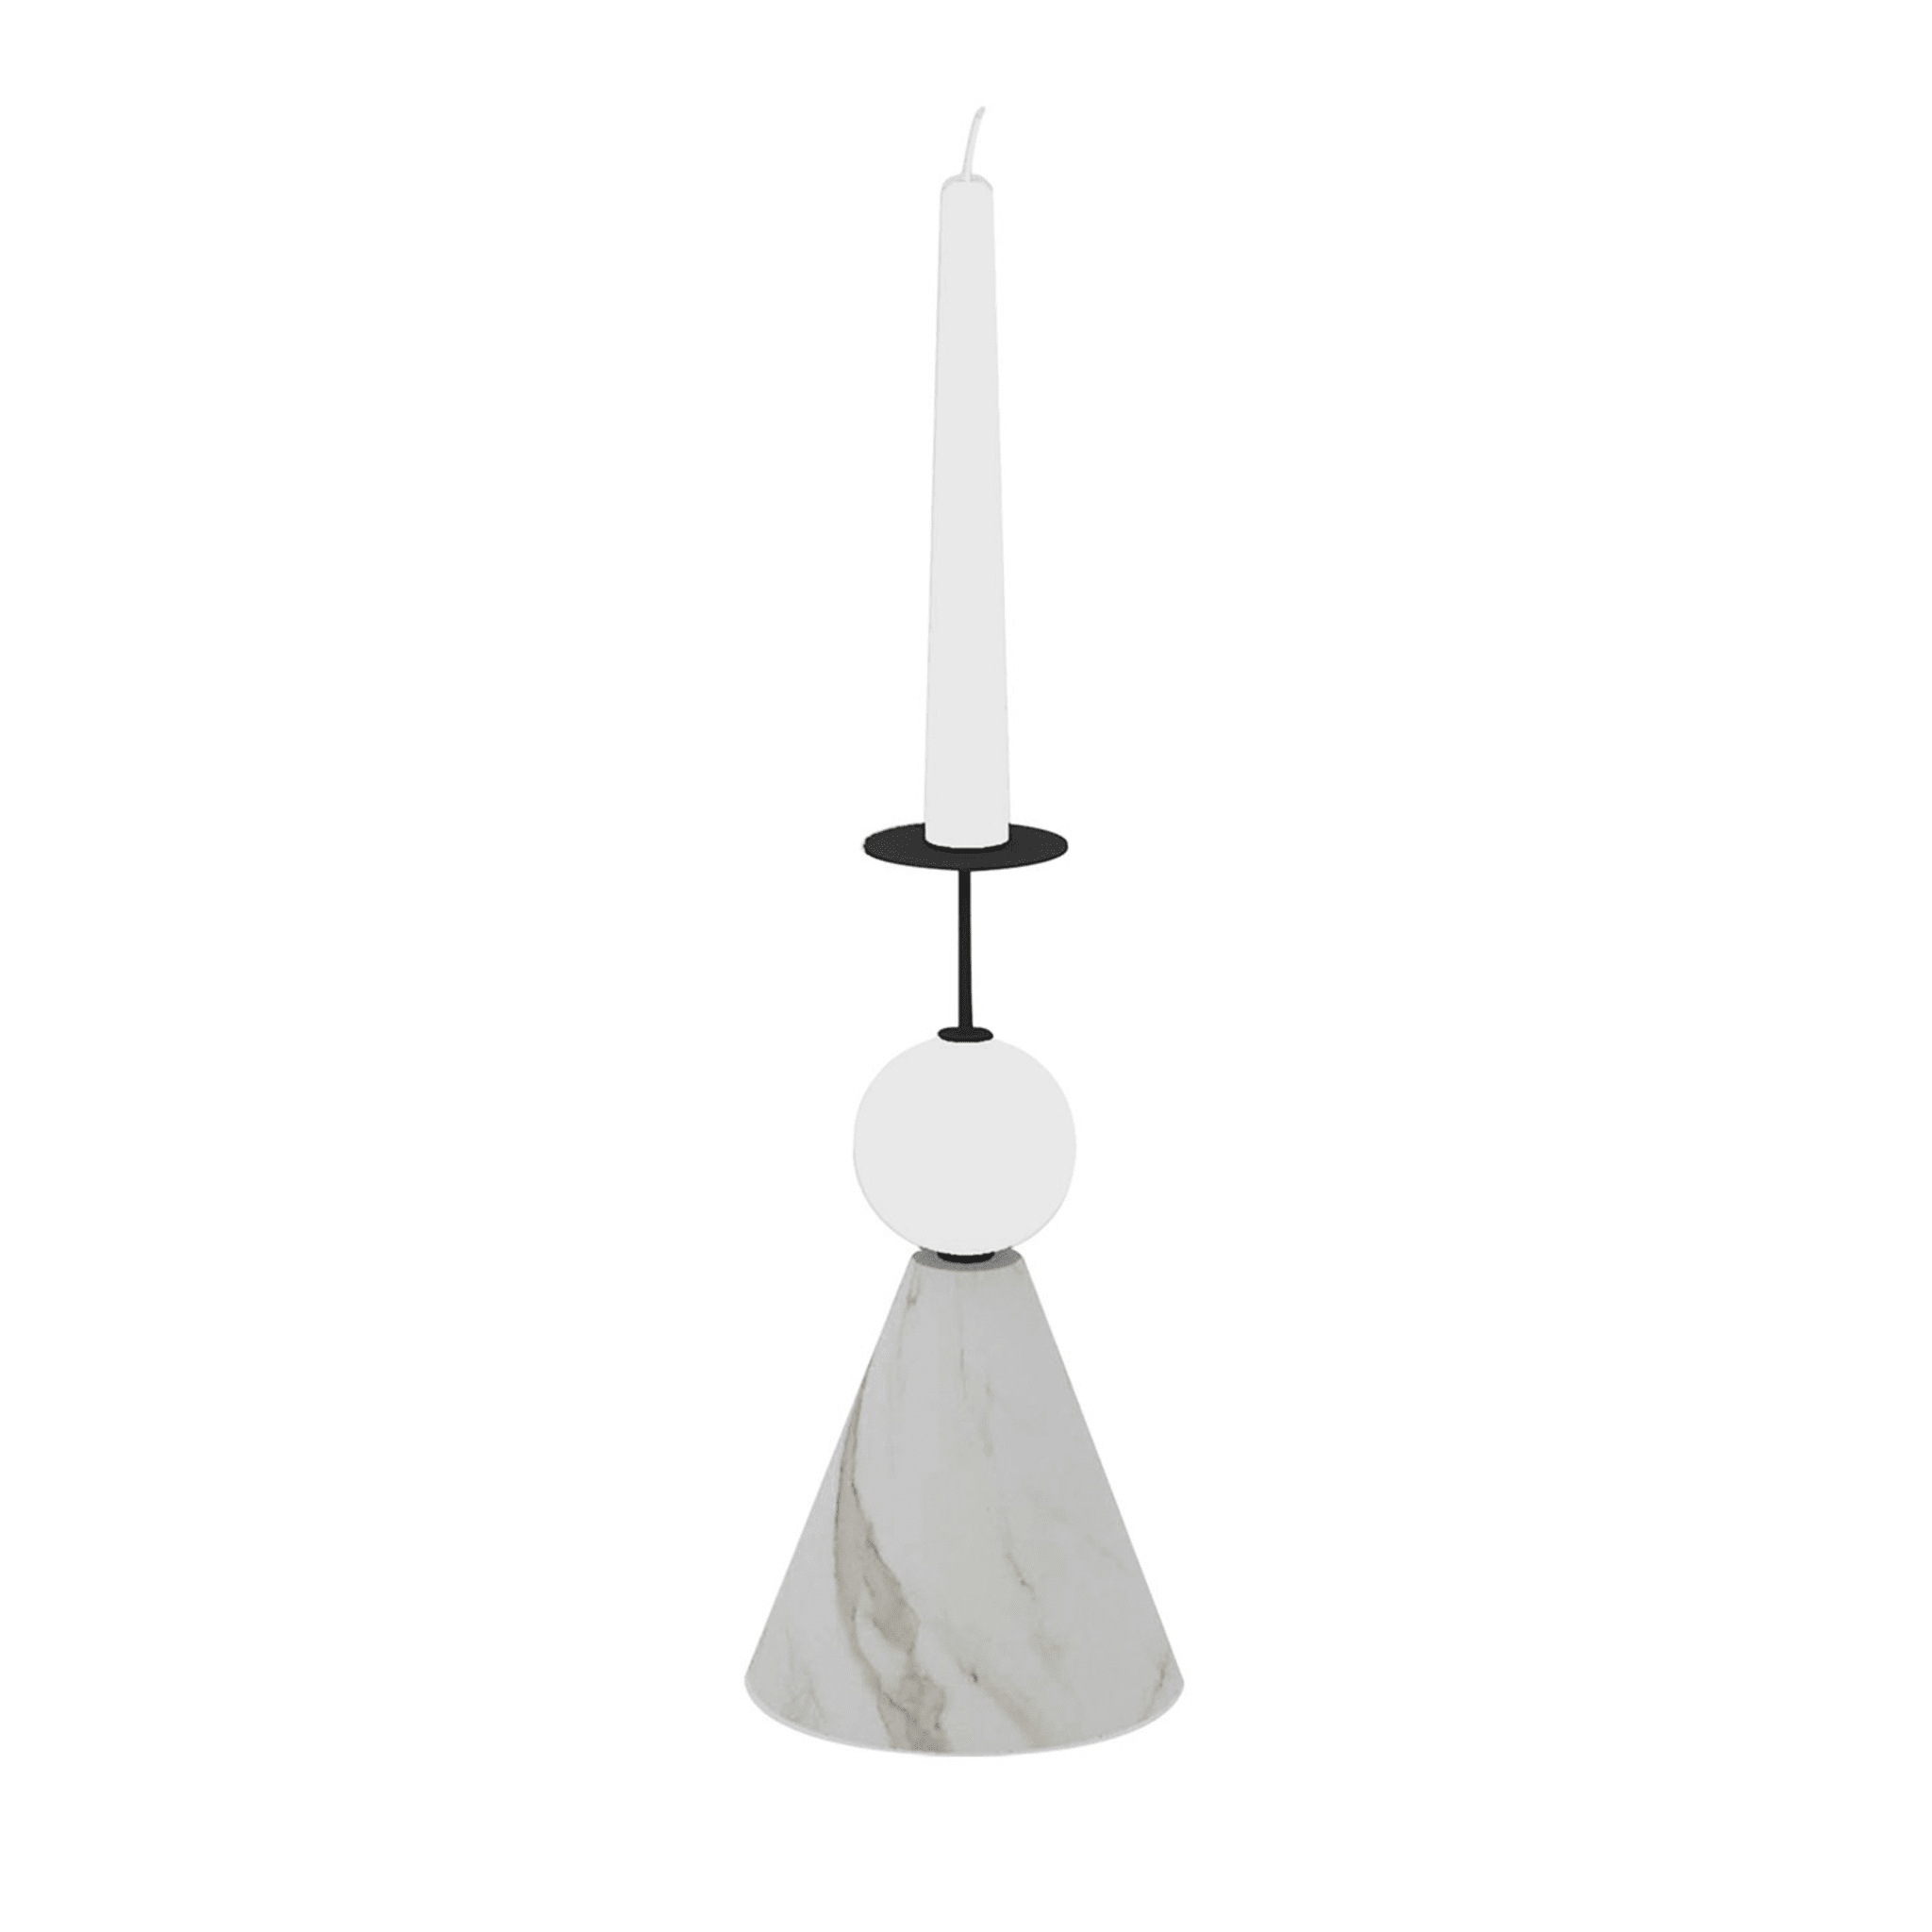 Raccontami White Carrara, Black and White Conical Candle Holder - Main view